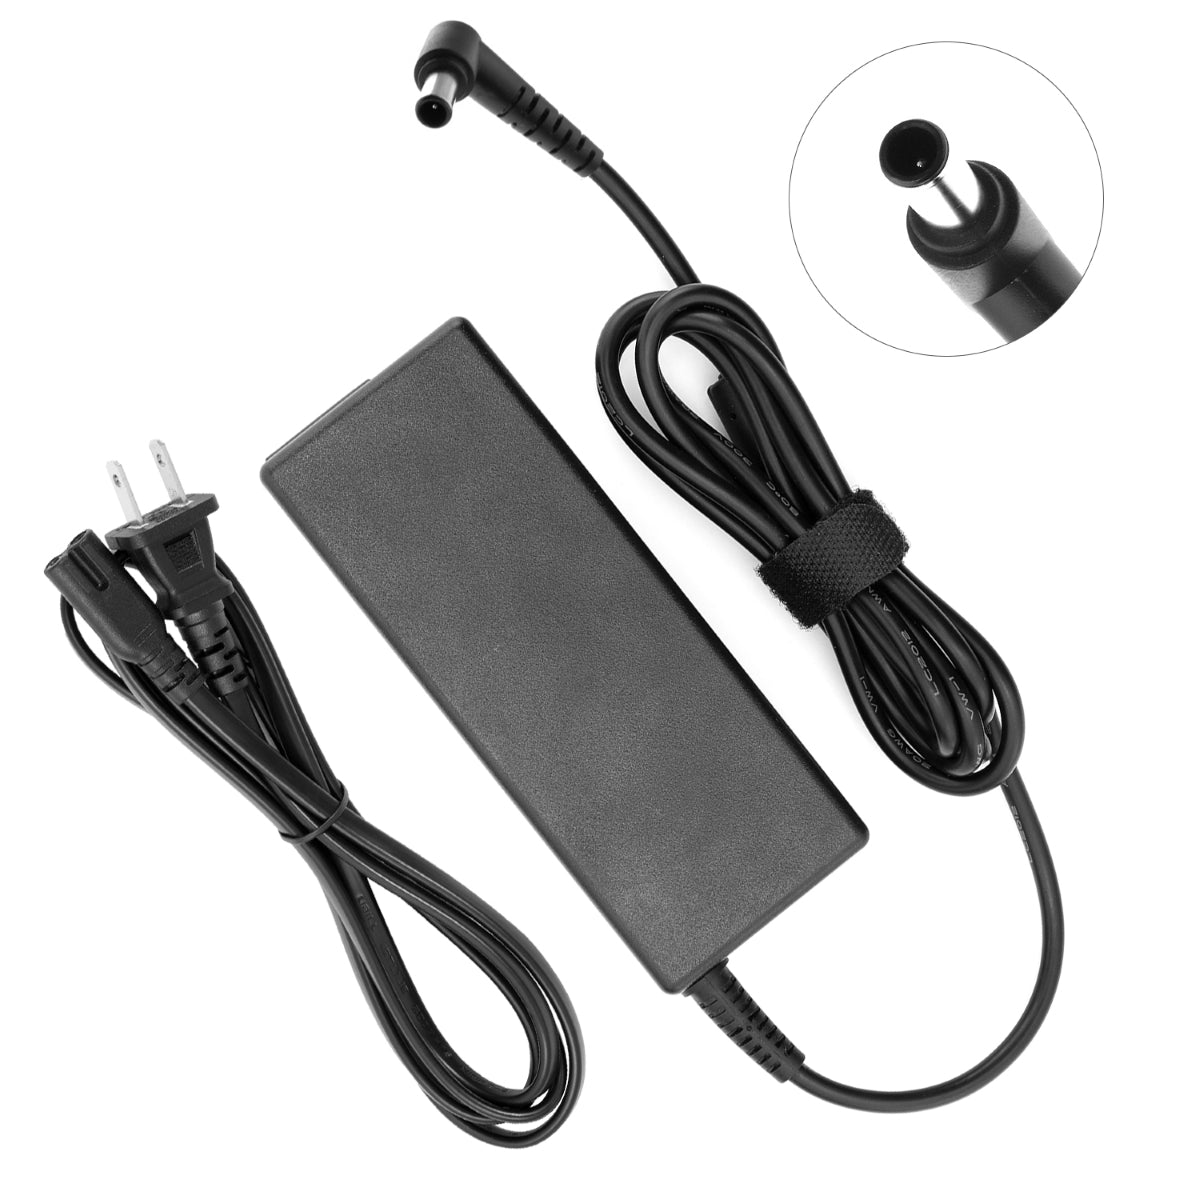 Compatible Replacement Fujitsu Lifebook P7010d Charger